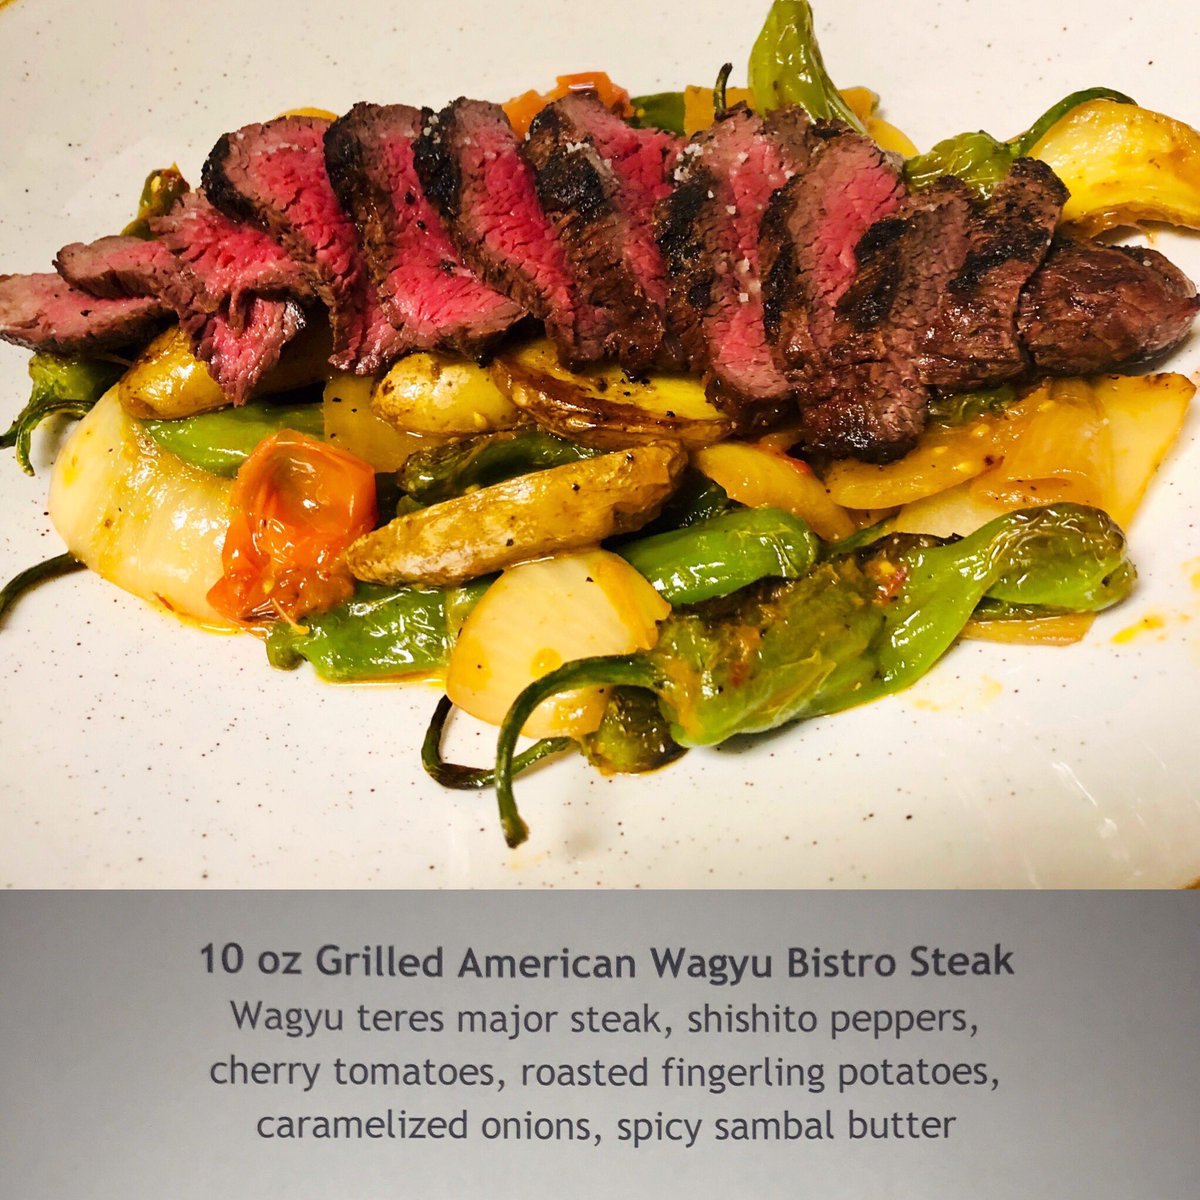 Meet our newest menu item- the Grilled American Wagyu Bistro Steak. An extremely flavorful cut of meat, the teres major steak is also known as shoulder tenderloin or bistro filet. Make sure and try this steak the next time you come in. #94thStreet #OCMD #Wagyu #TeresMajor